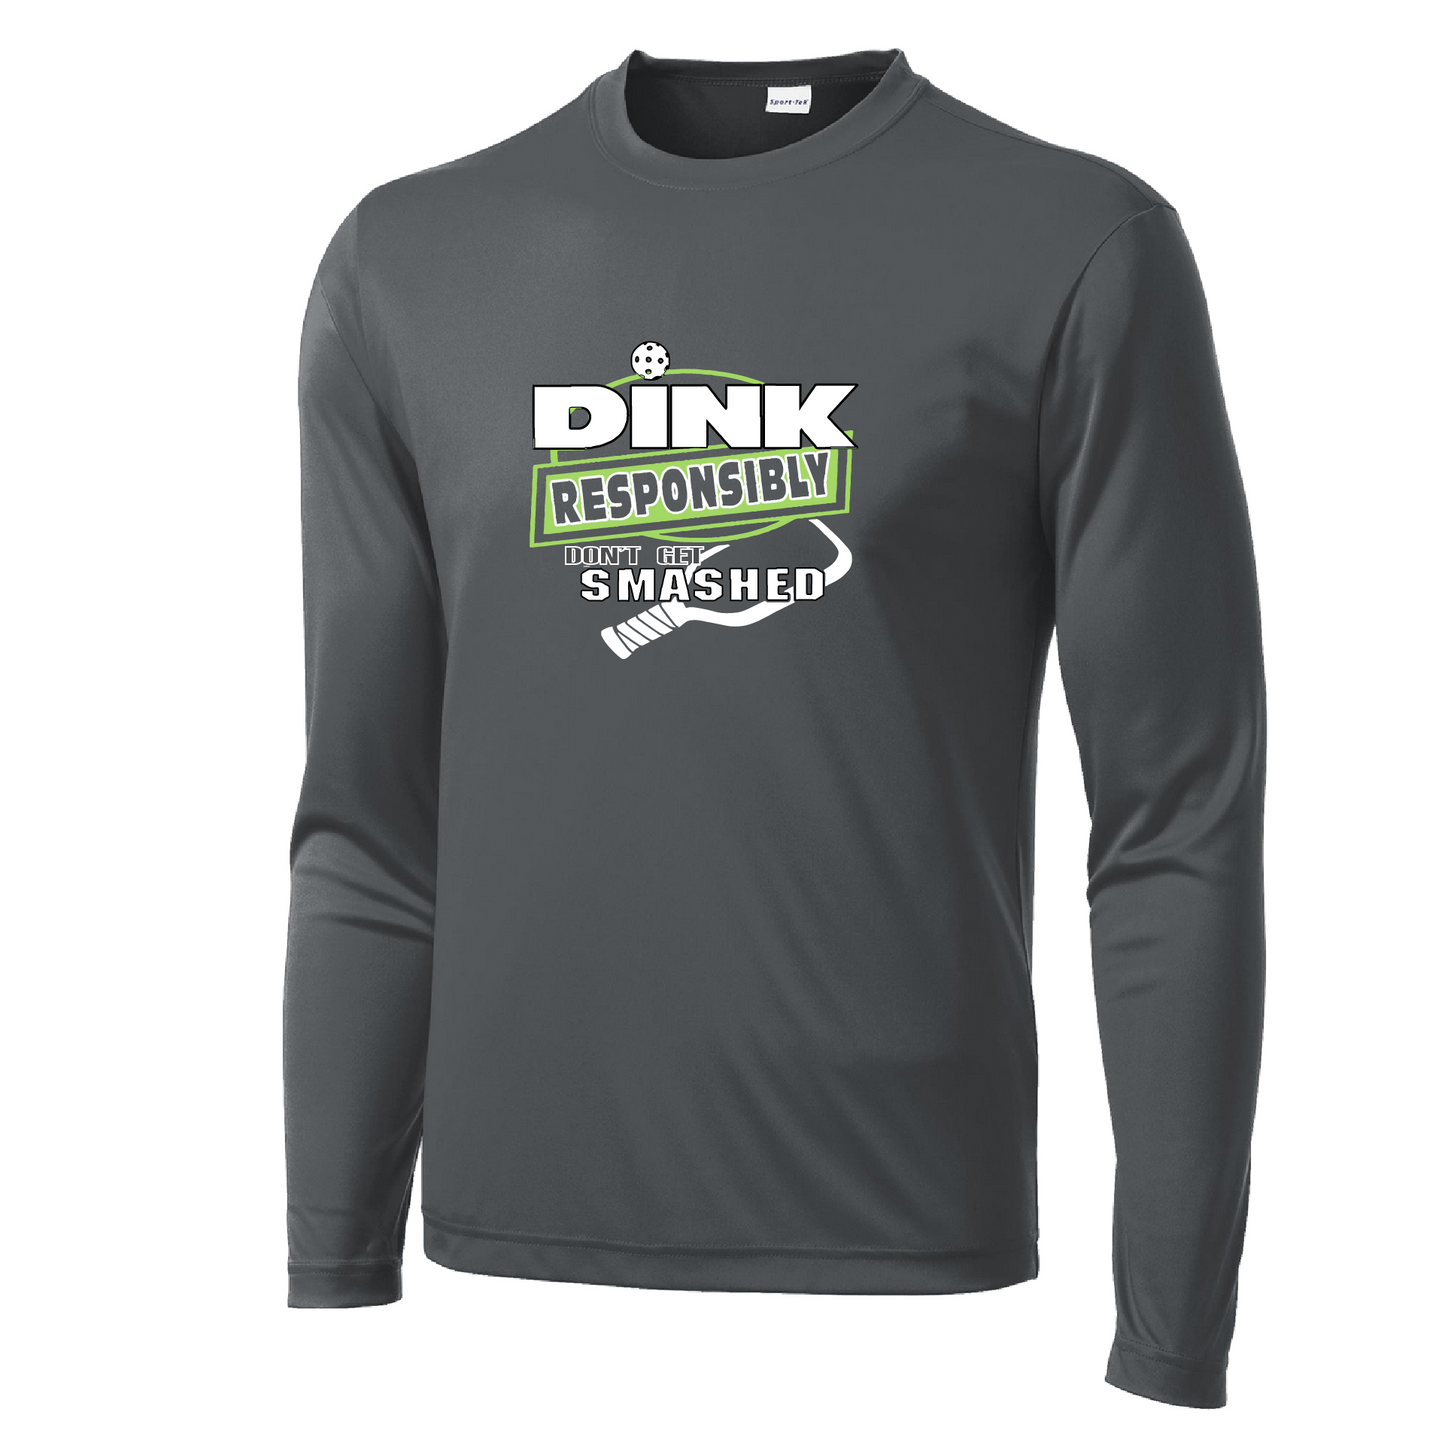 Pickleball Design: Dink Responsibly - Don't Get Smashed  Men's Style: Long Sleeve  Shirts are lightweight, roomy and highly breathable. These moisture-wicking shirts are designed for athletic performance. They feature PosiCharge technology to lock in color and prevent logos from fading. Removable tag and set-in sleeves for comfort.